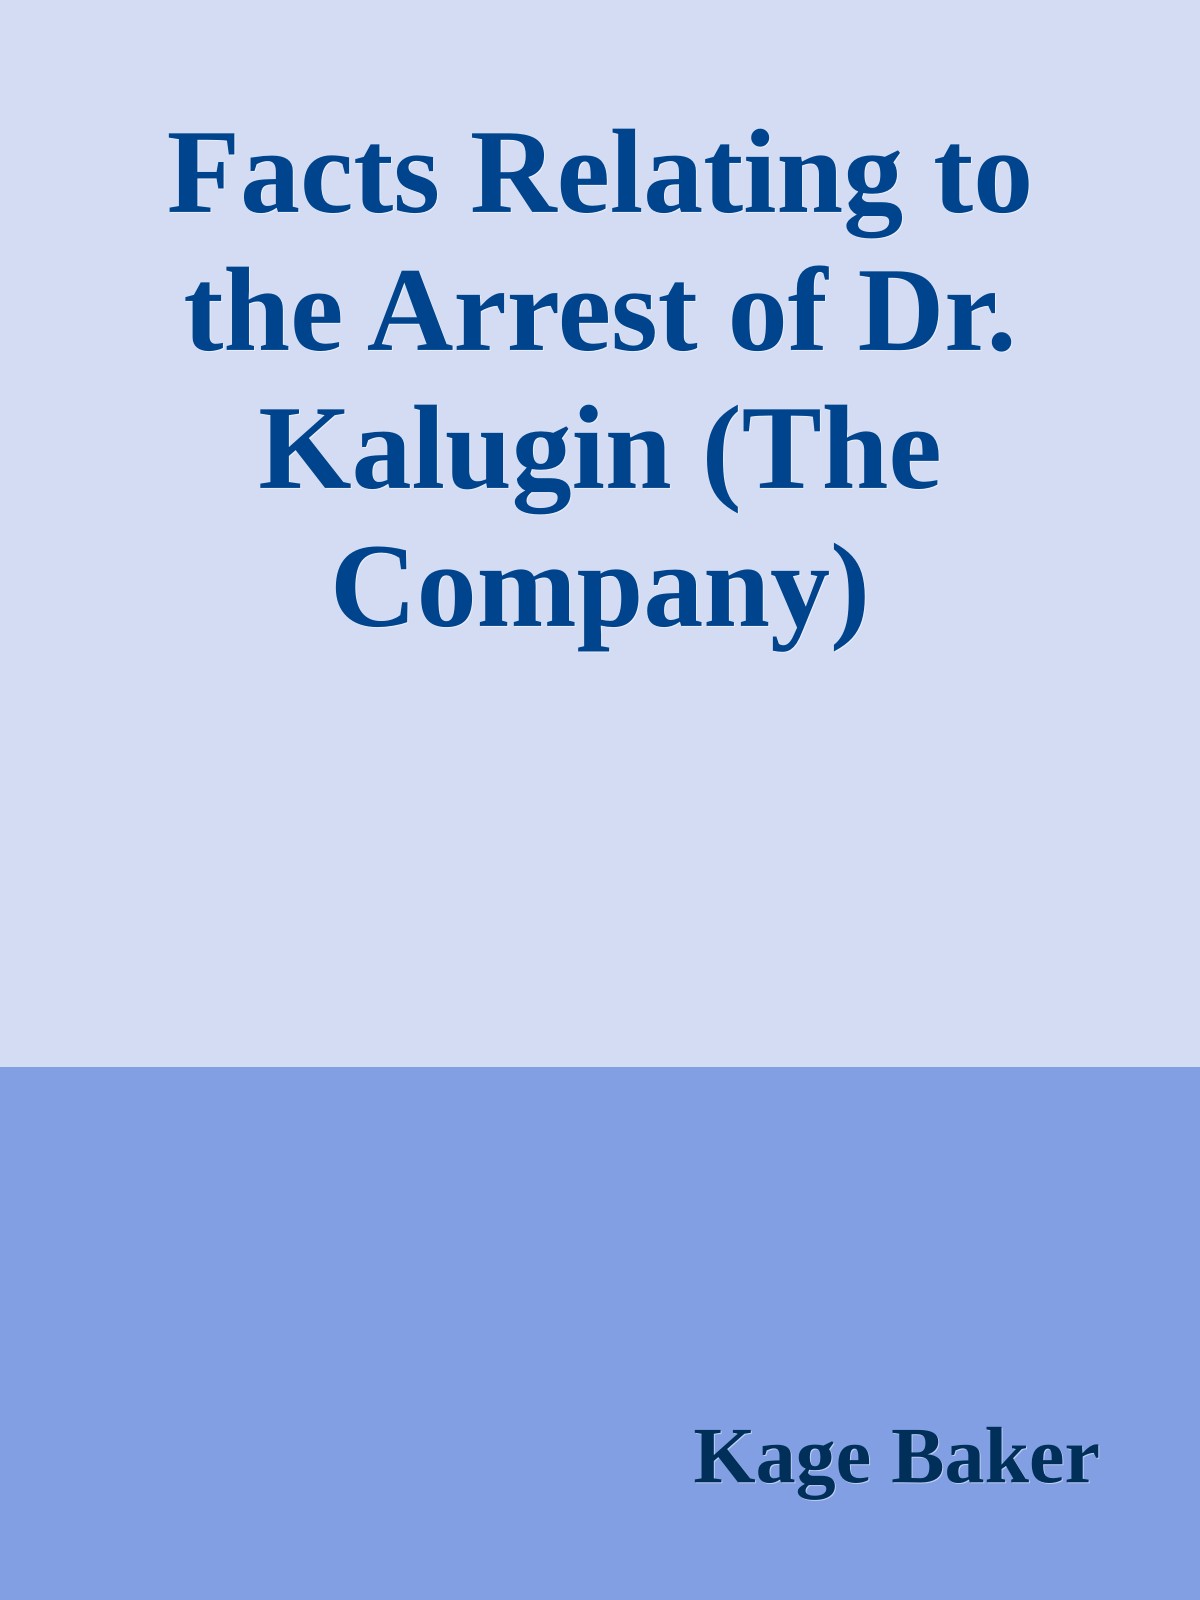 Facts Relating to the Arrest of Dr. Kalugin (The Company)